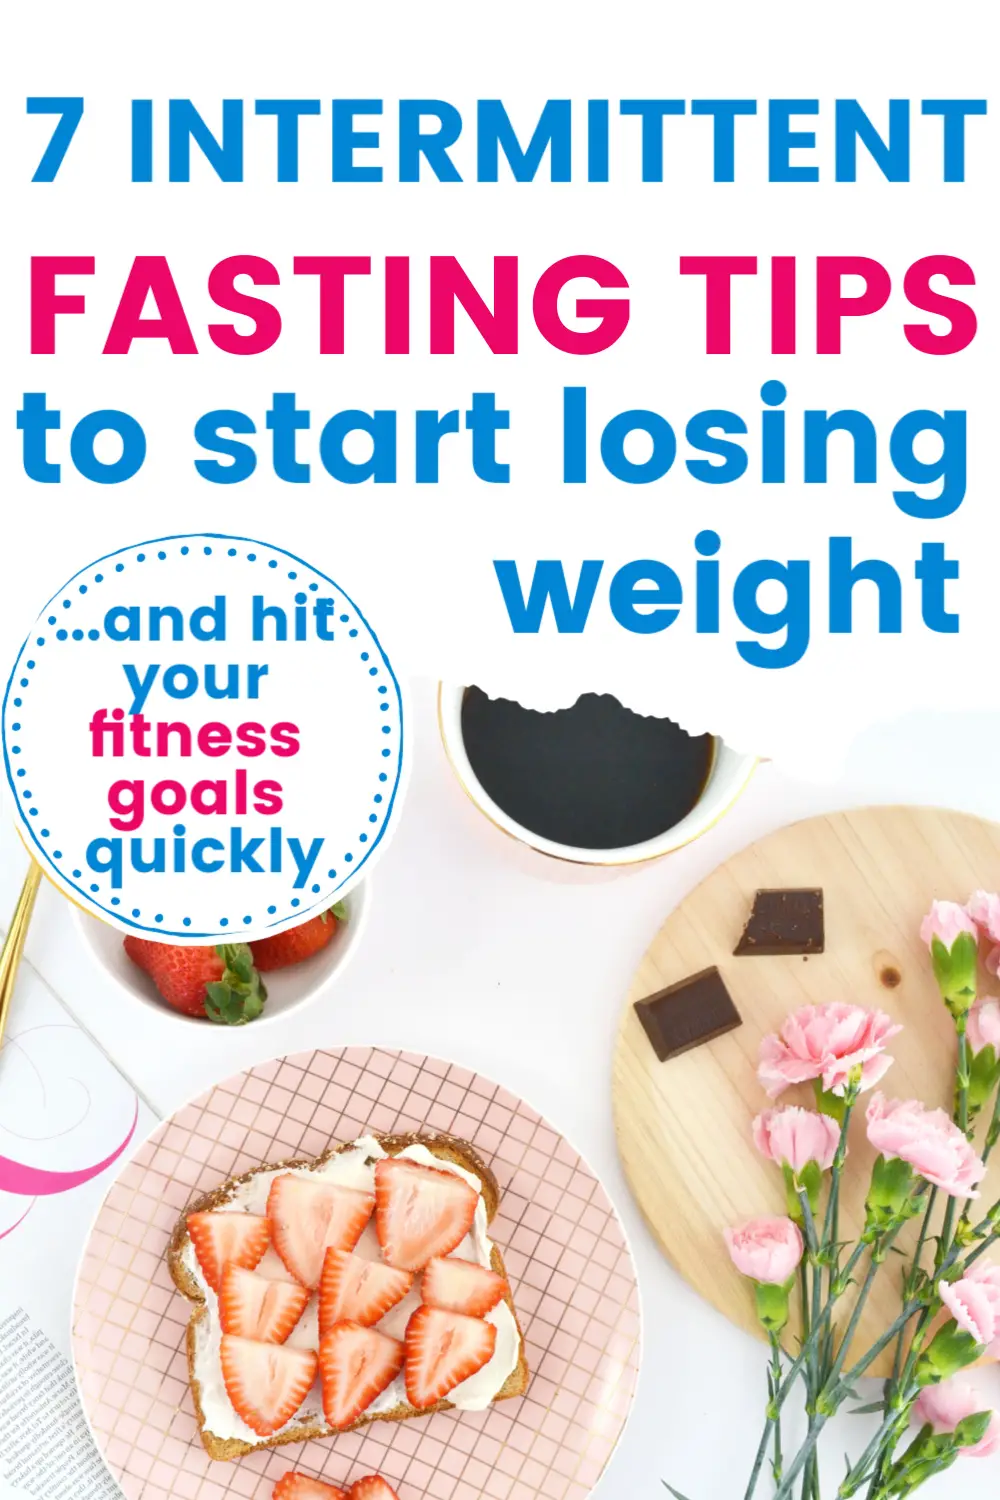 7 Intermittent Fasting Tips for Beginners to Lose Weight